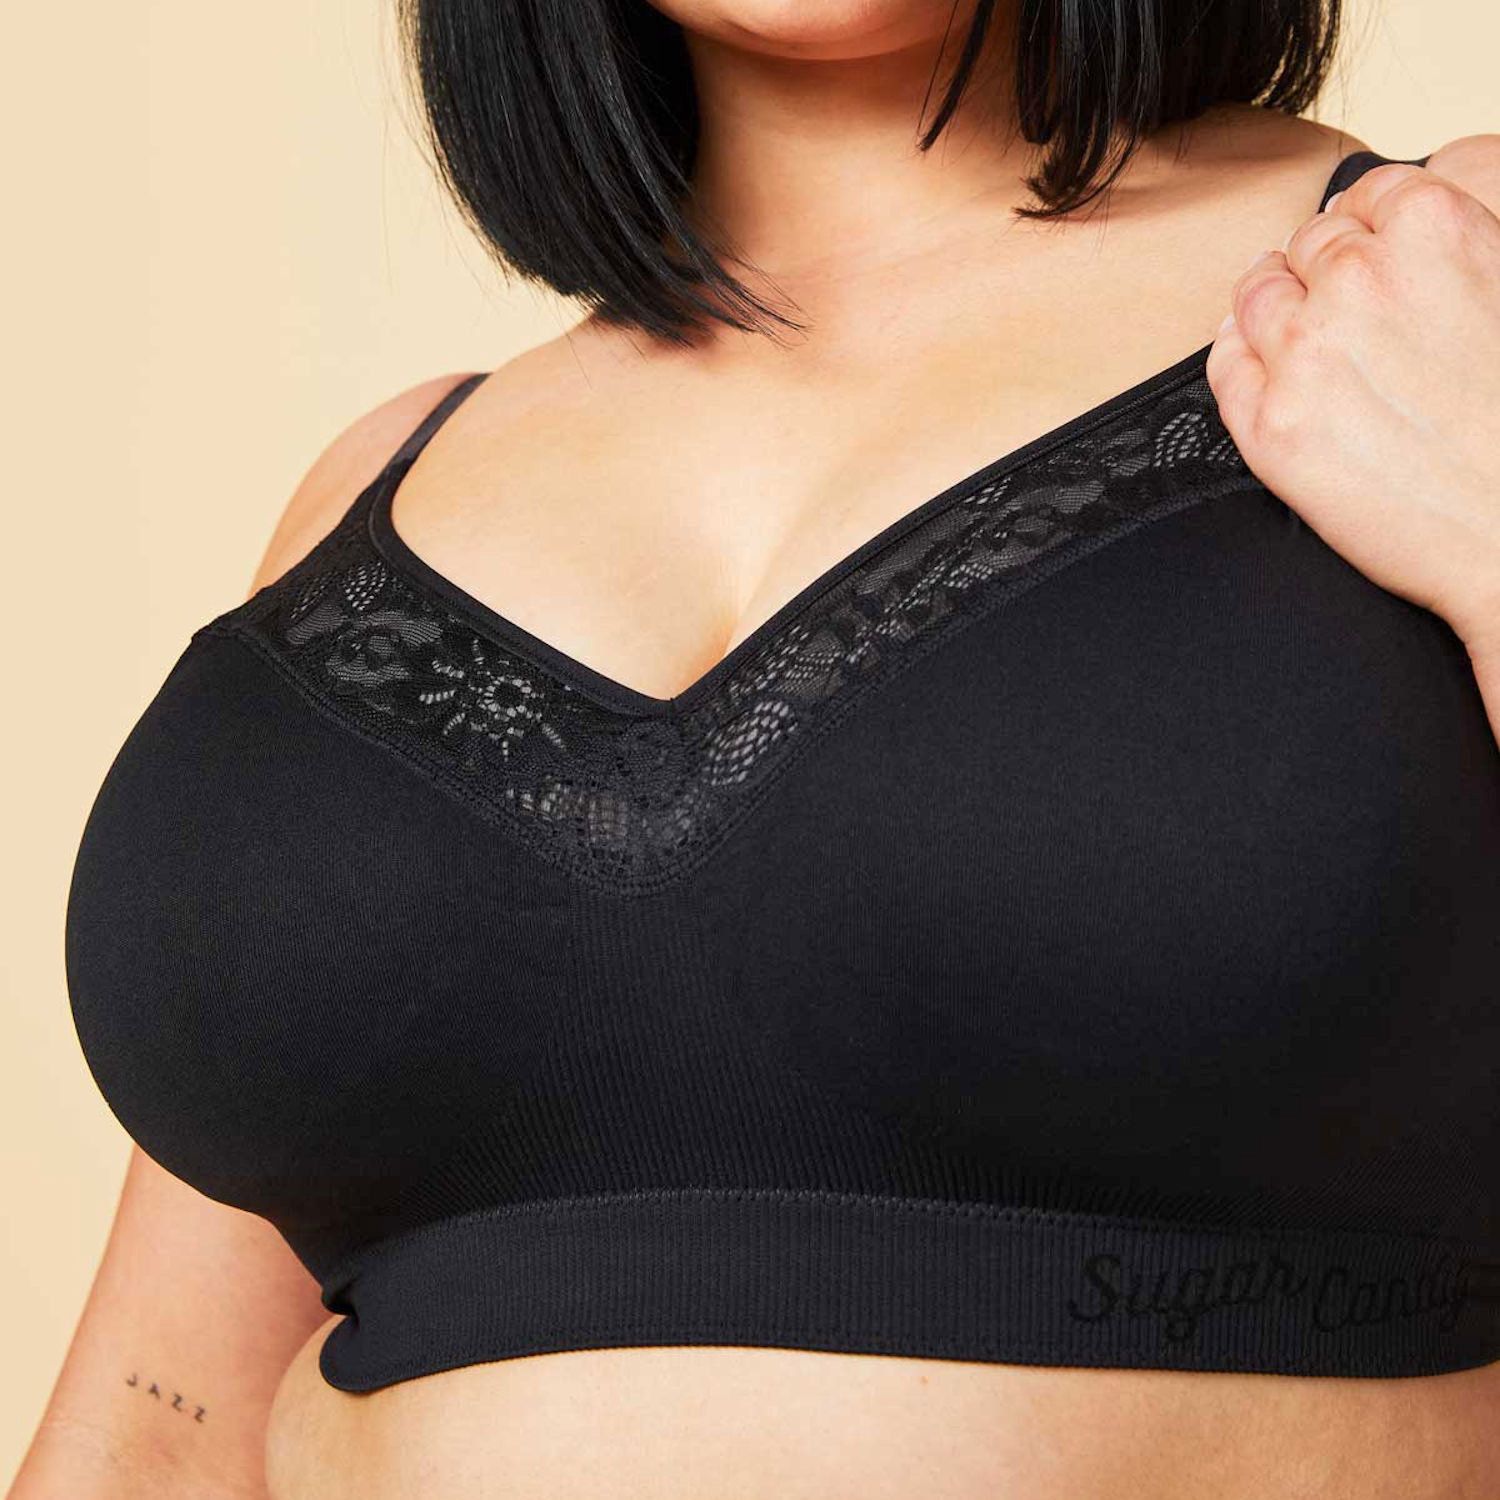 Sugar Candy Luxe (Black) by Cake - Non-Underwired bras